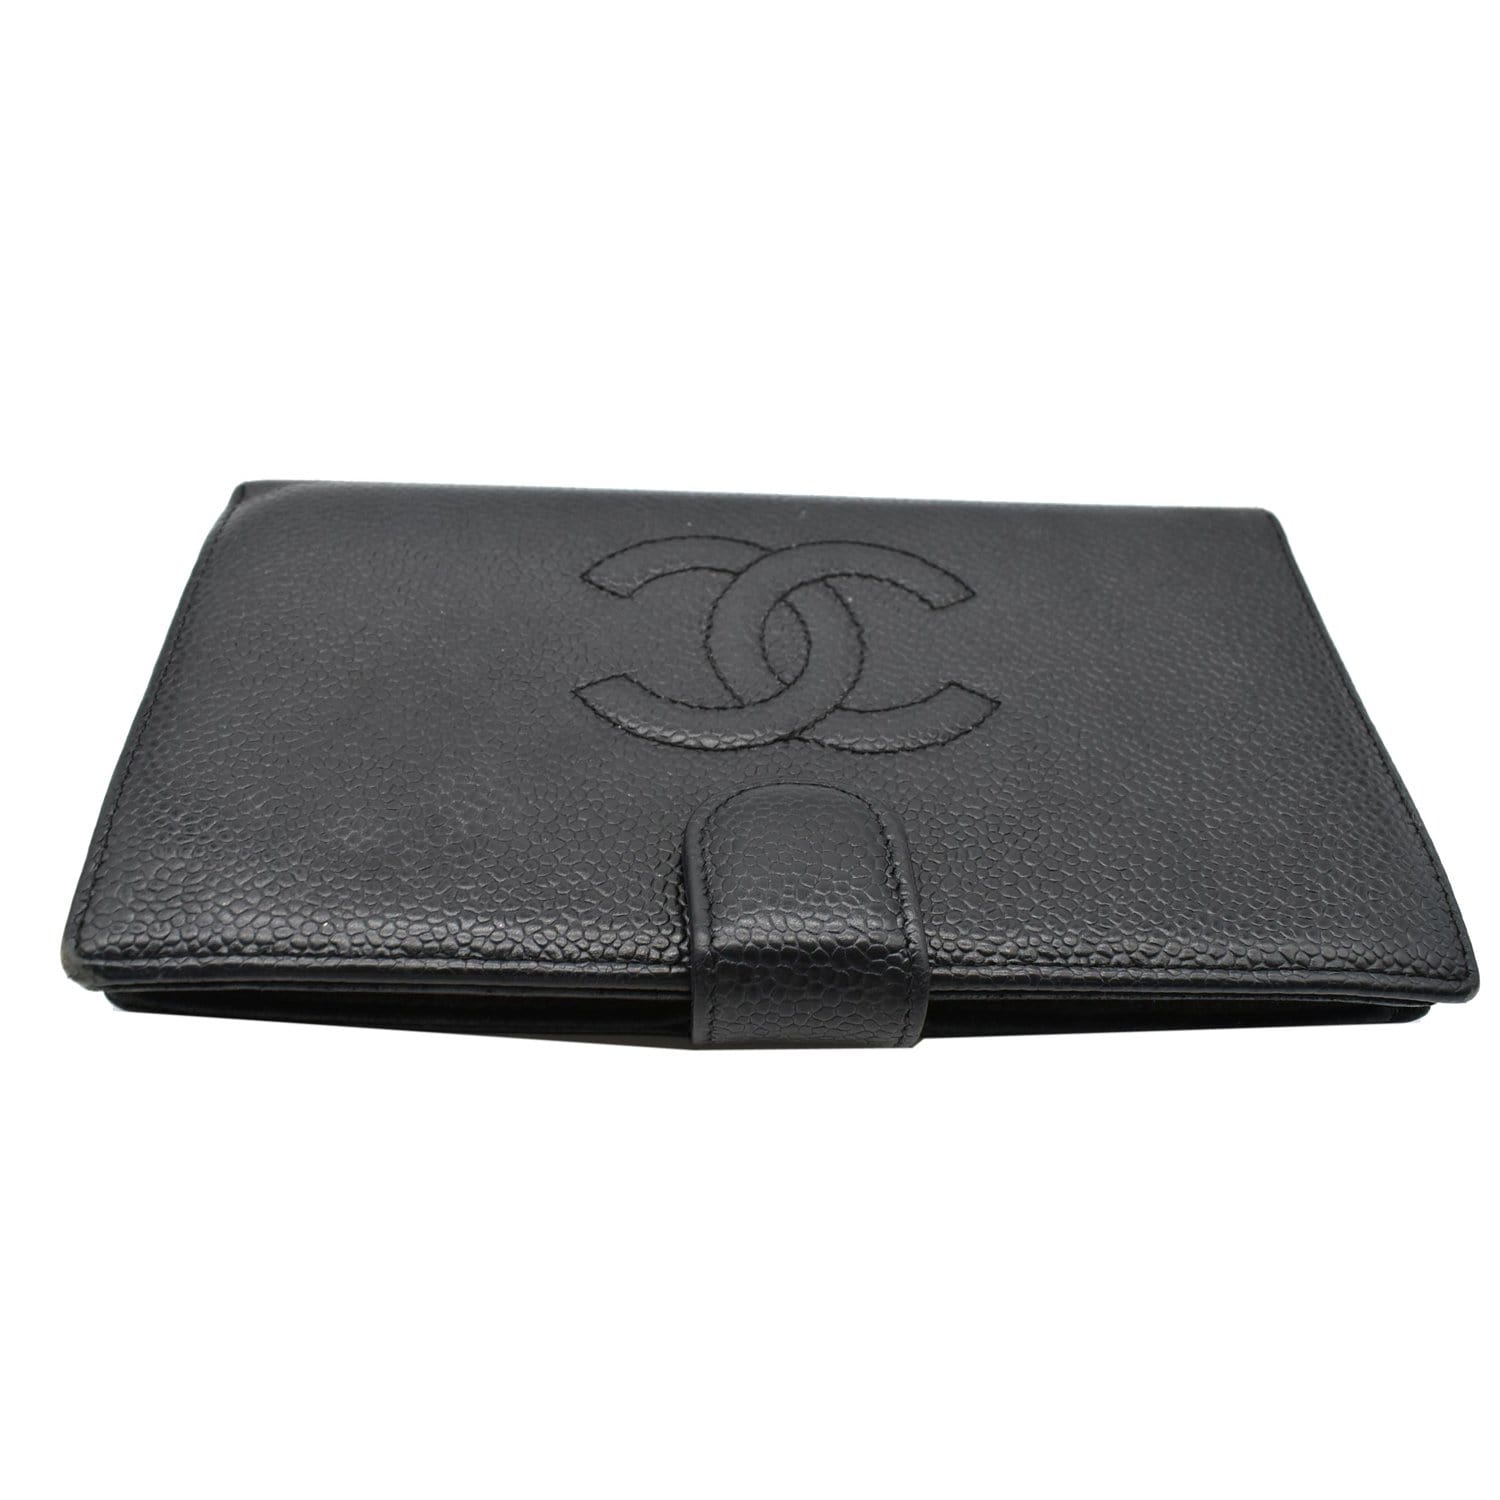 Vintage CHANEL red caviar leather wallet with large CC logo. Classic a –  eNdApPi ***where you can find your favorite designer  vintages..authentic, affordable, and lovable.